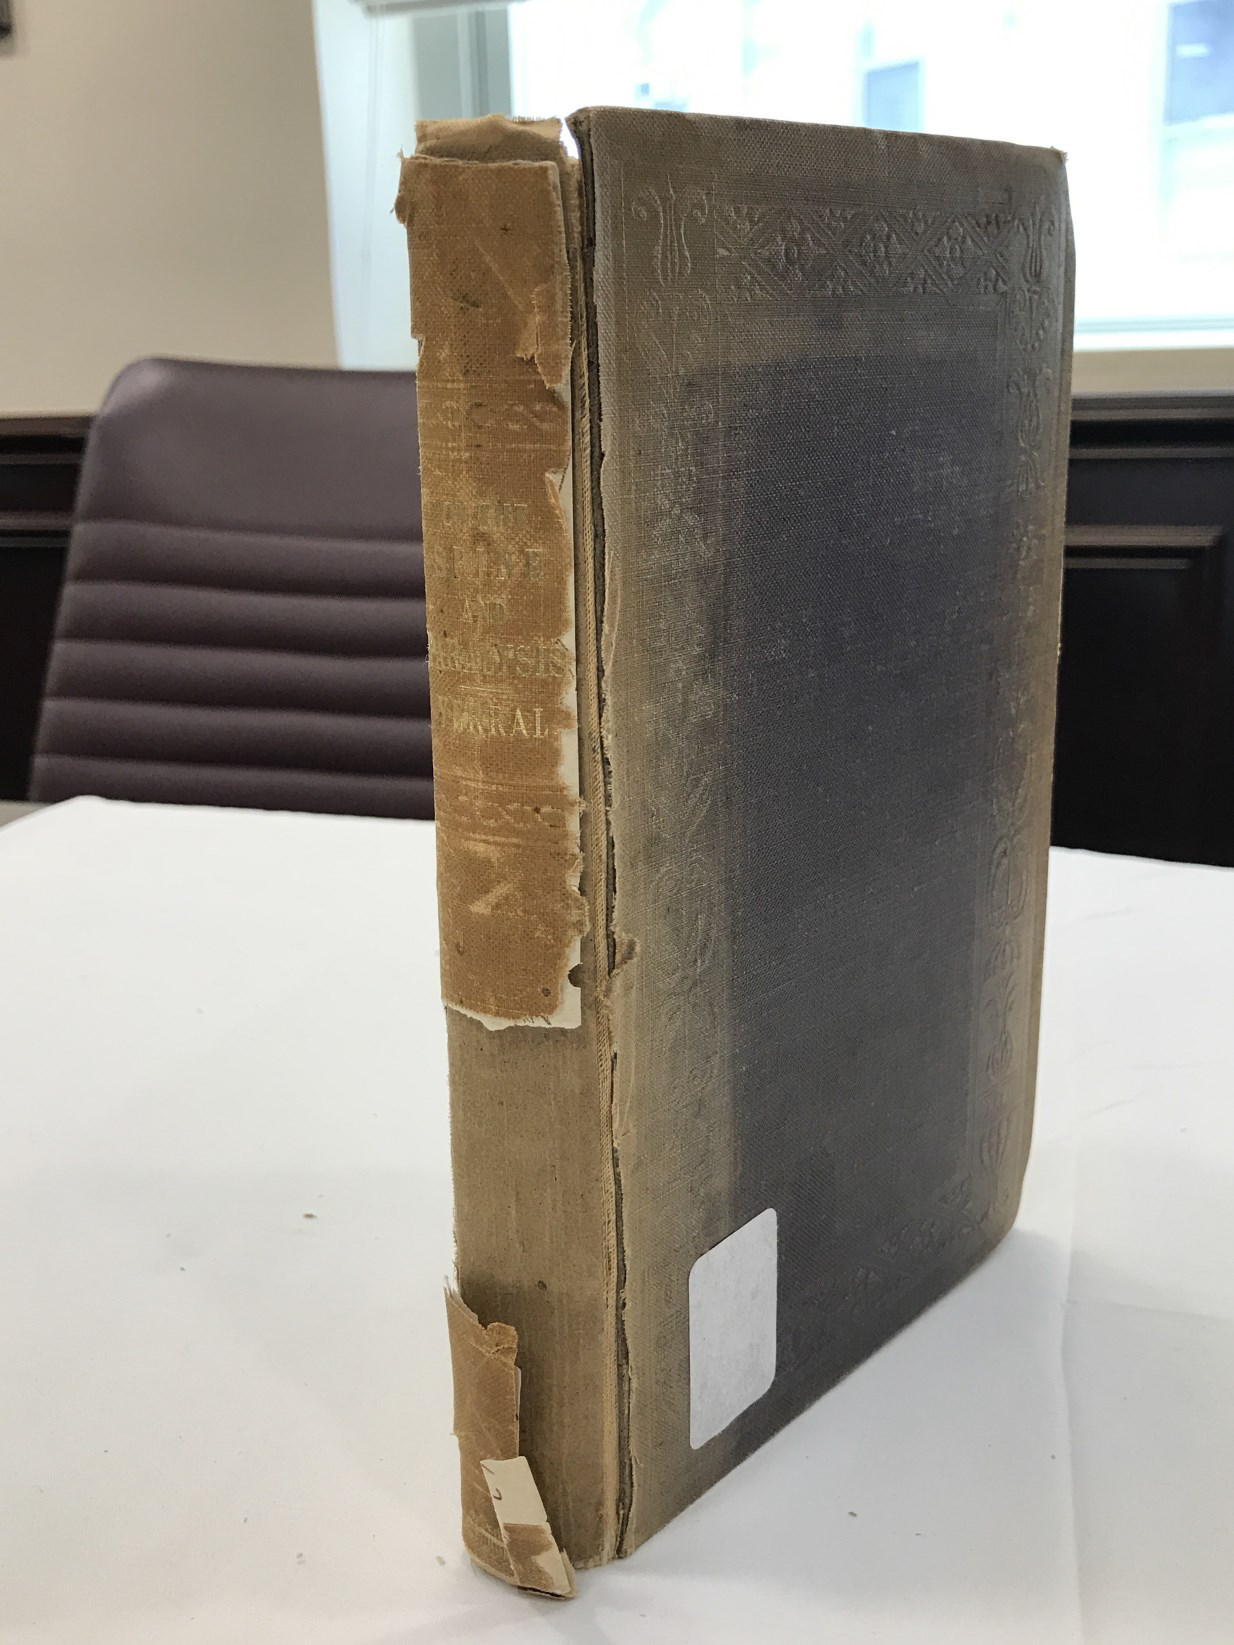 repairs needed to book's spine